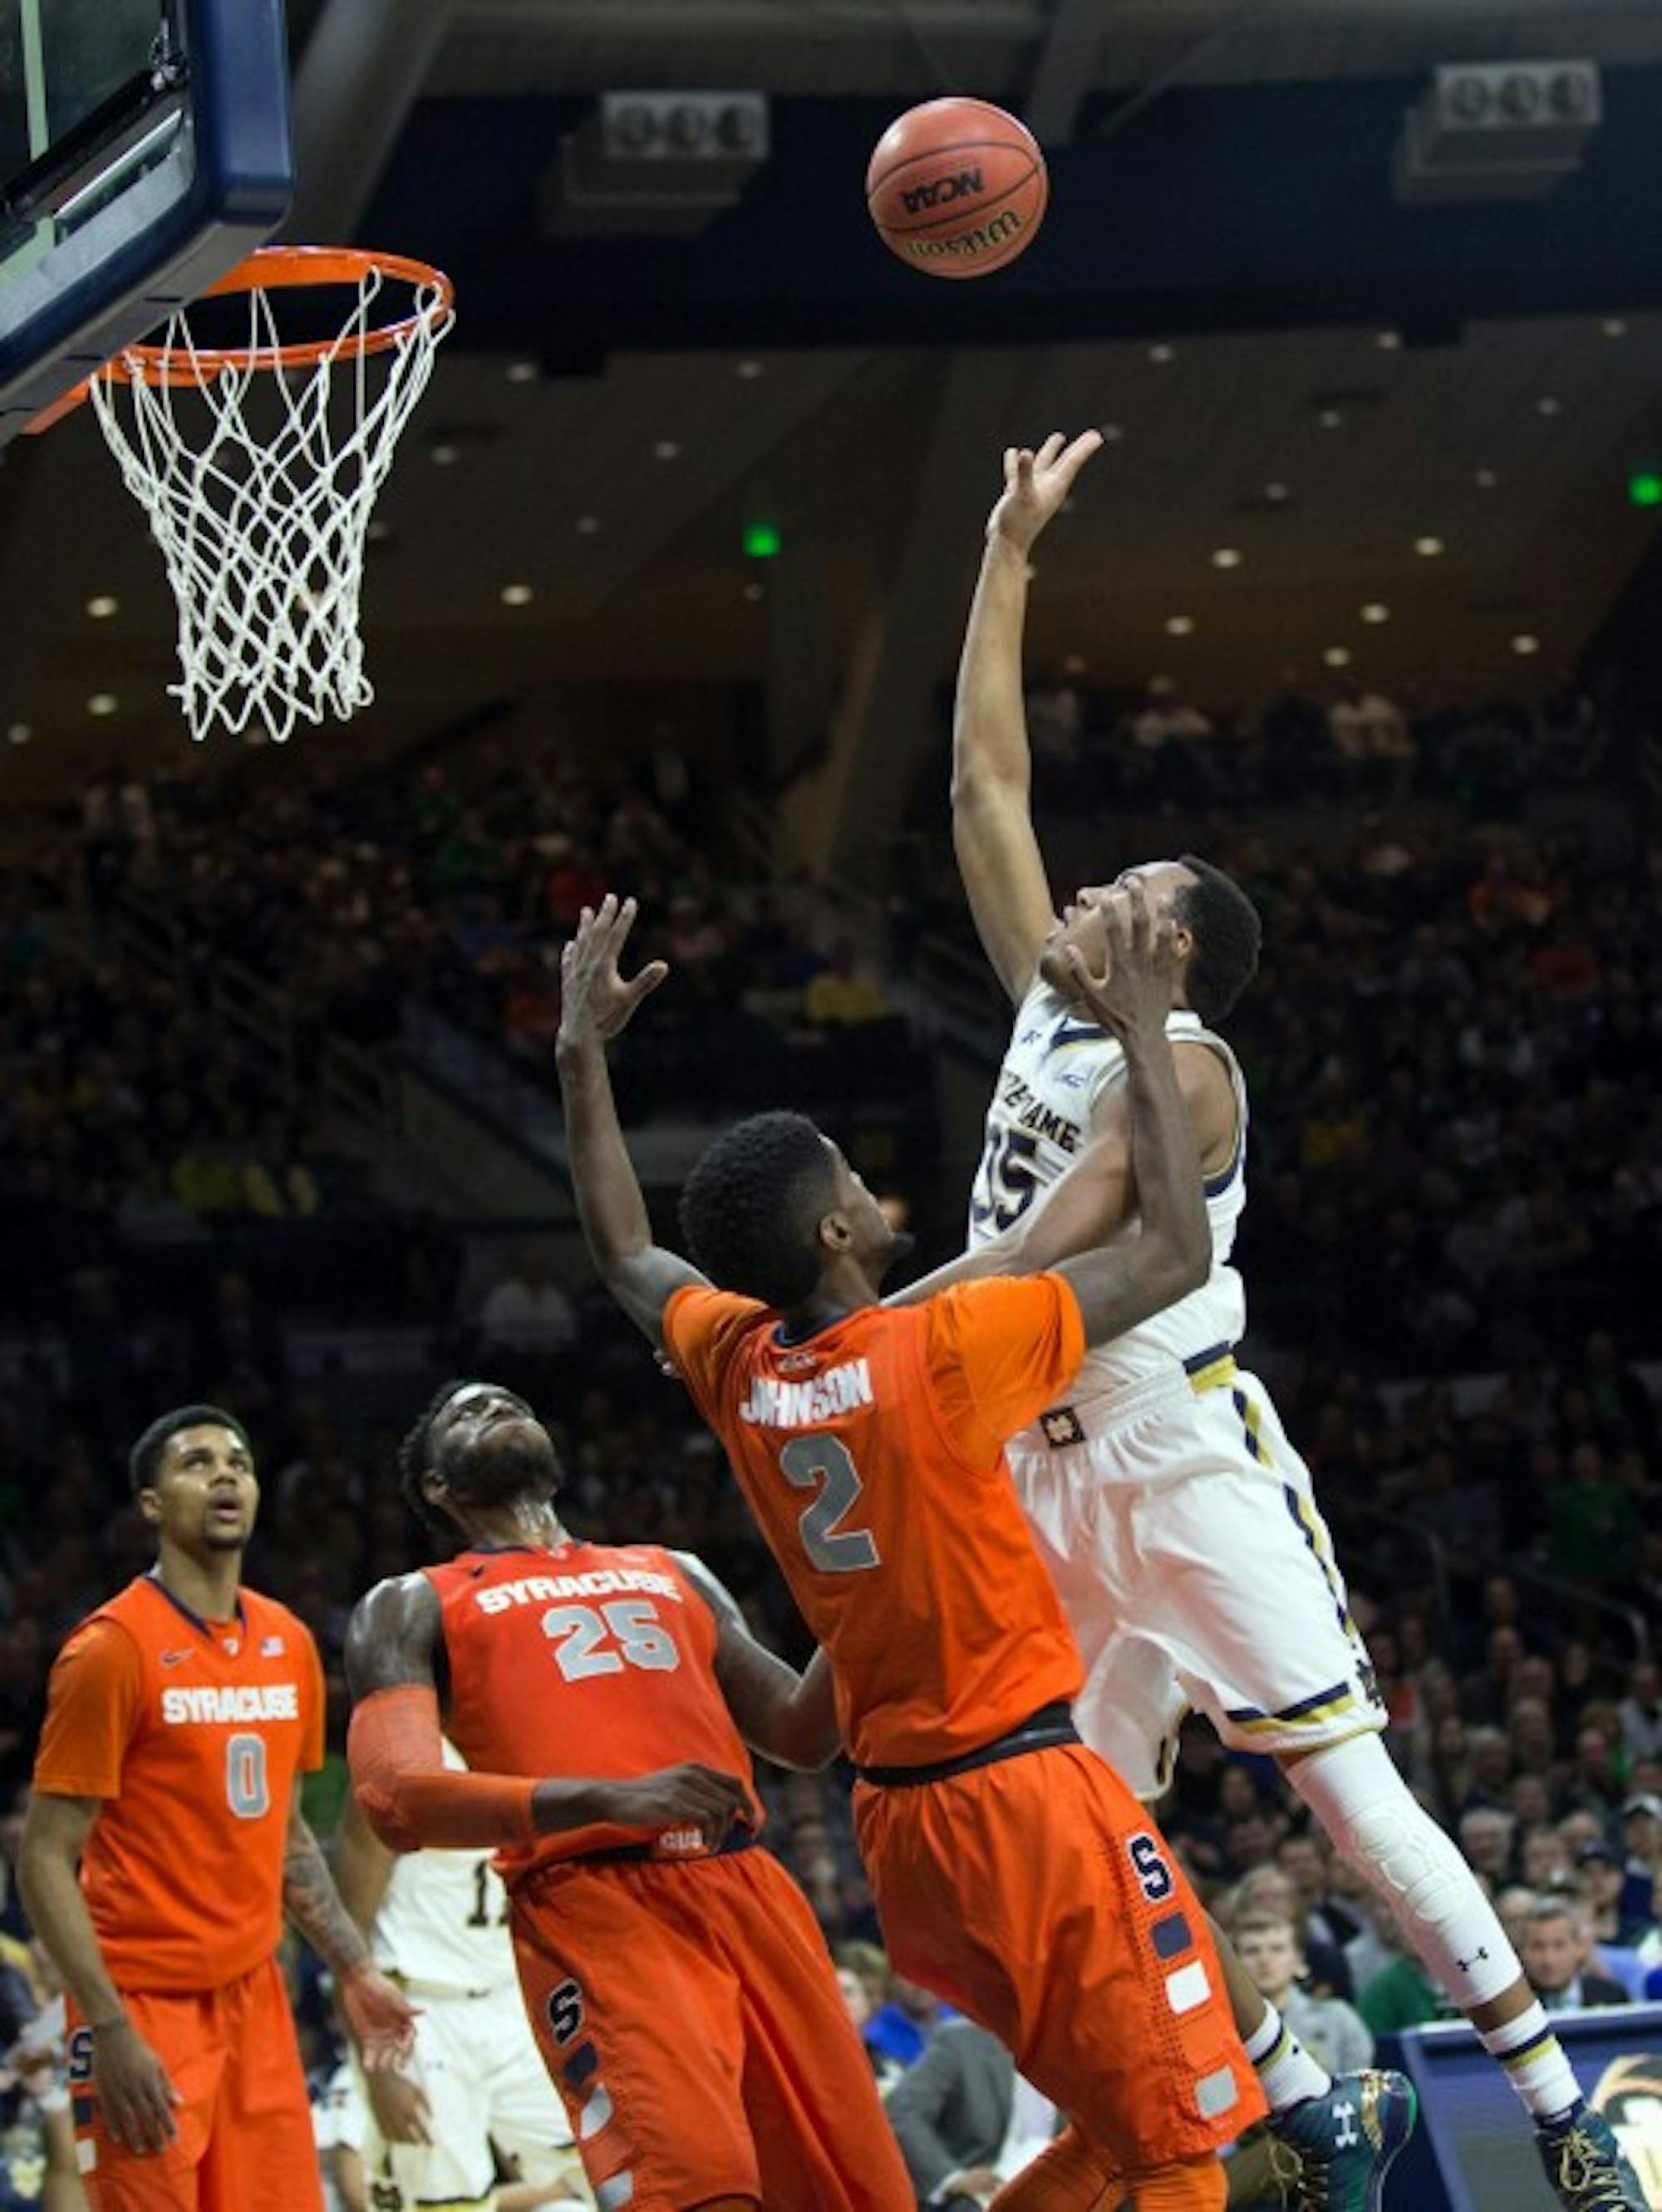 Irish freshman forward Bonzie Colson jumps for a rebound in Notre Dame’s 65-60 loss to Syracuse on Feb. 24 at Purcell Pavilion.